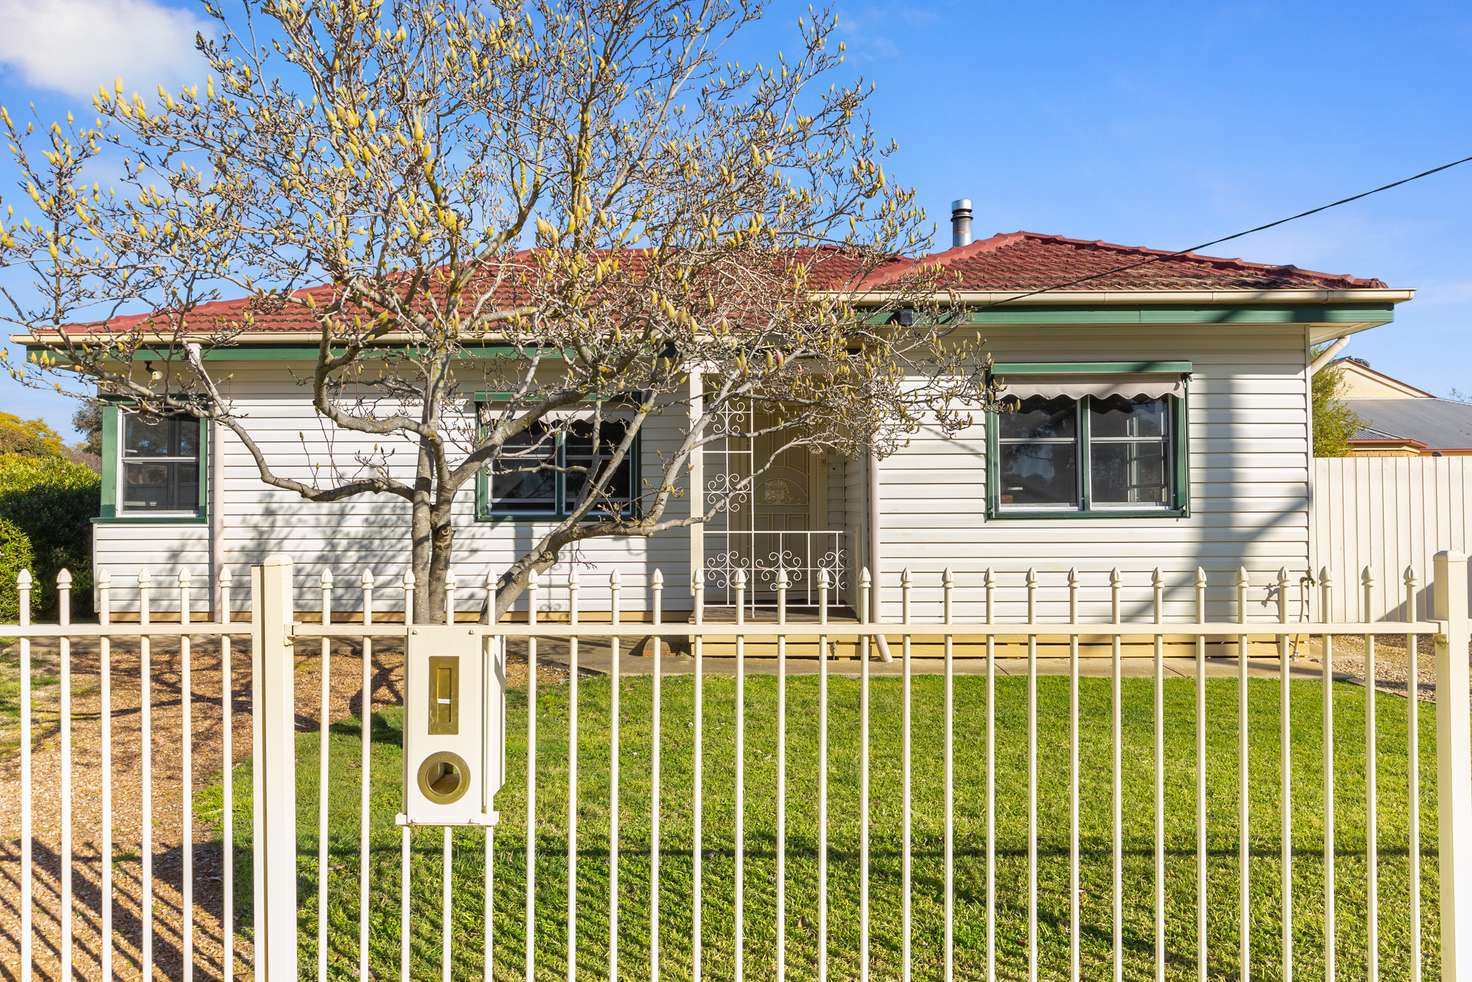 Main view of Homely house listing, 393 High St, Nagambie VIC 3608